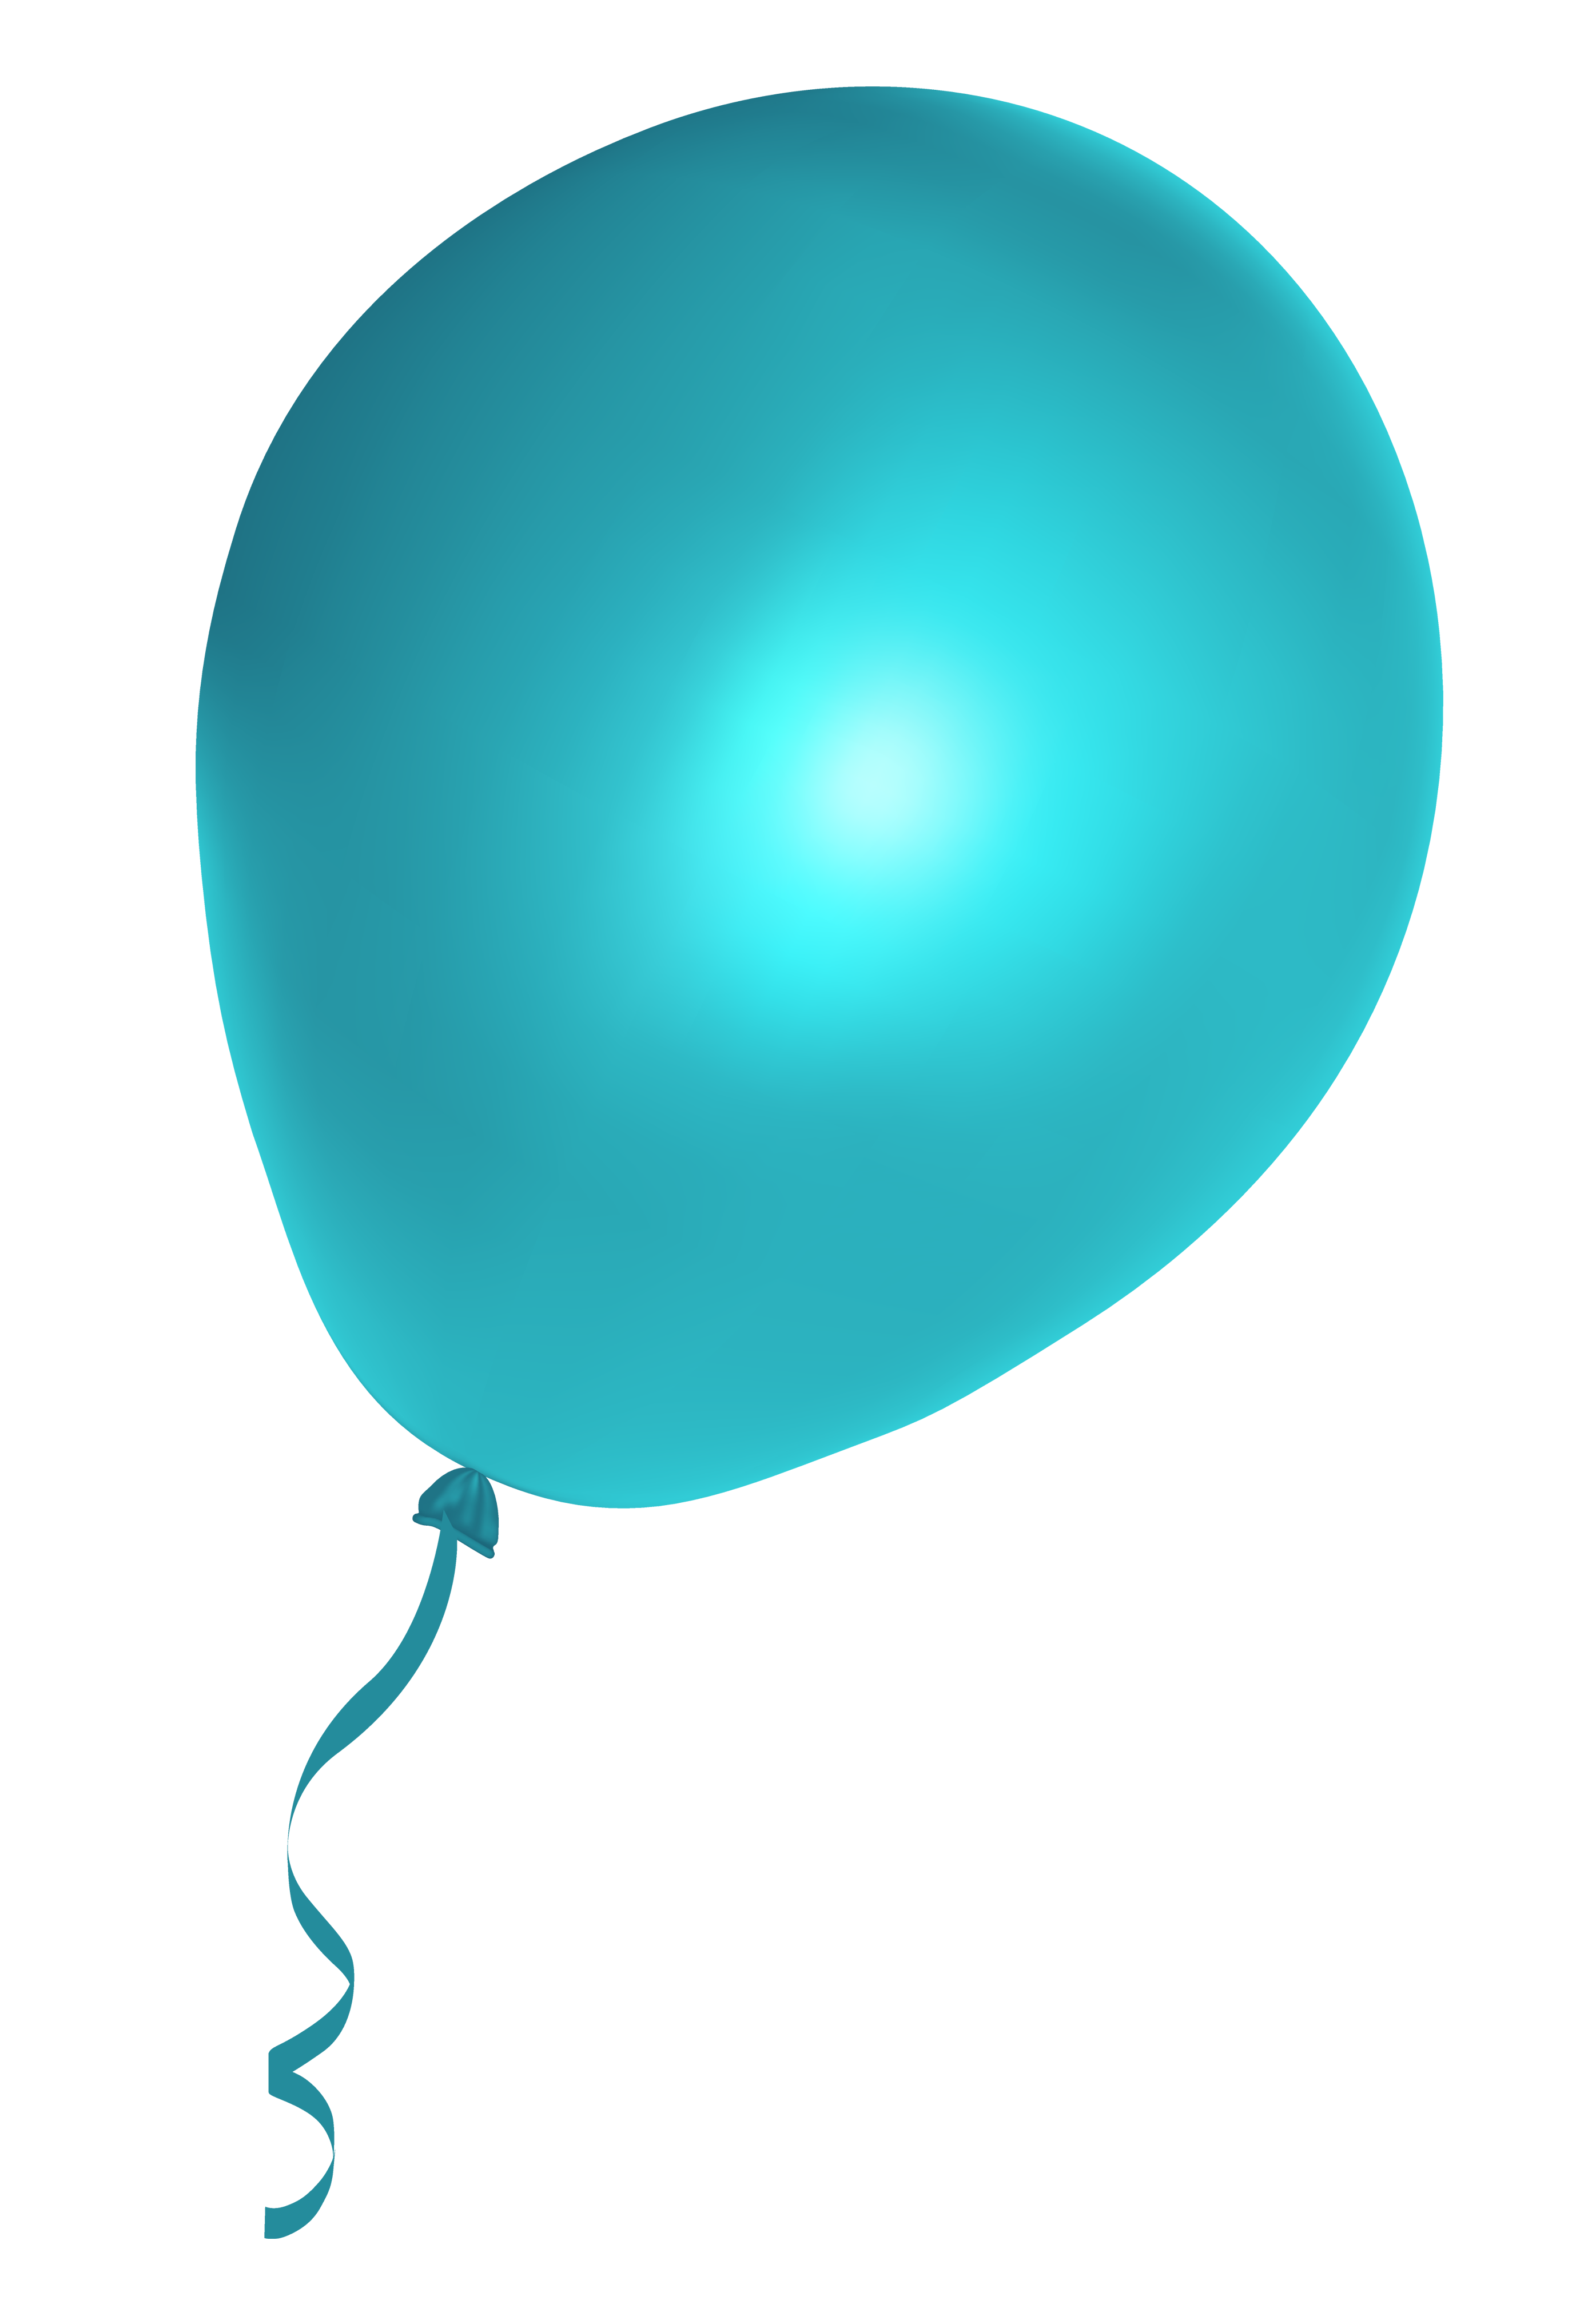 Transparent Background Png Transparent Blue Birthday Balloons Png ...